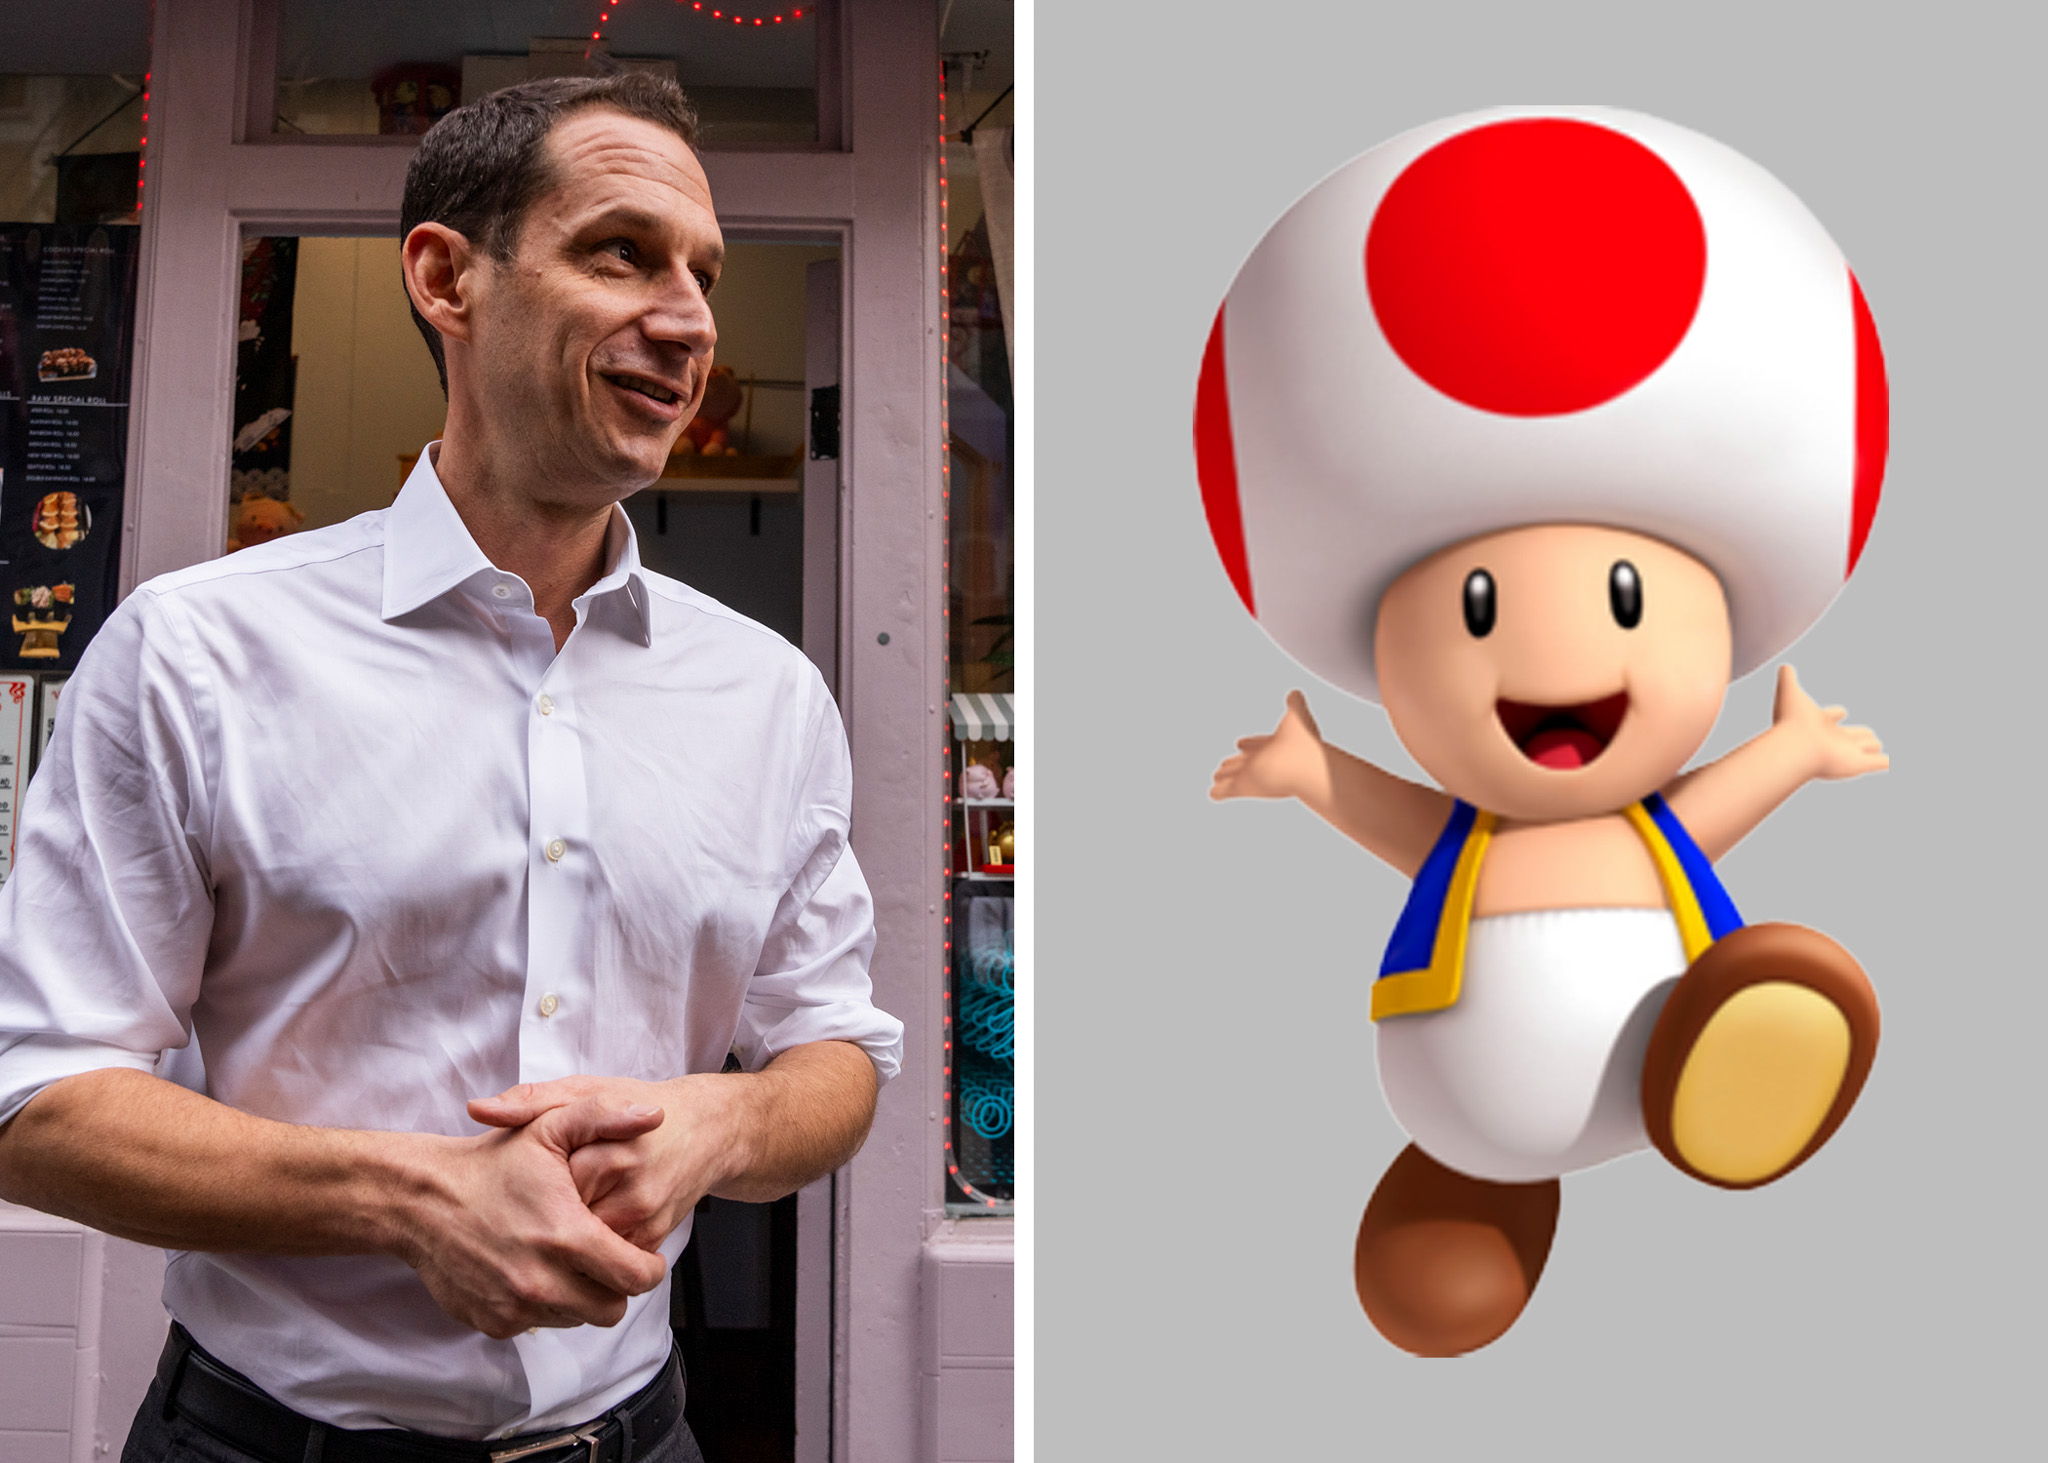 The image is split into two halves: the left shows a man in a white shirt outdoors, and the right features Toad, a character from Mario, with a red-spotted mushroom cap.